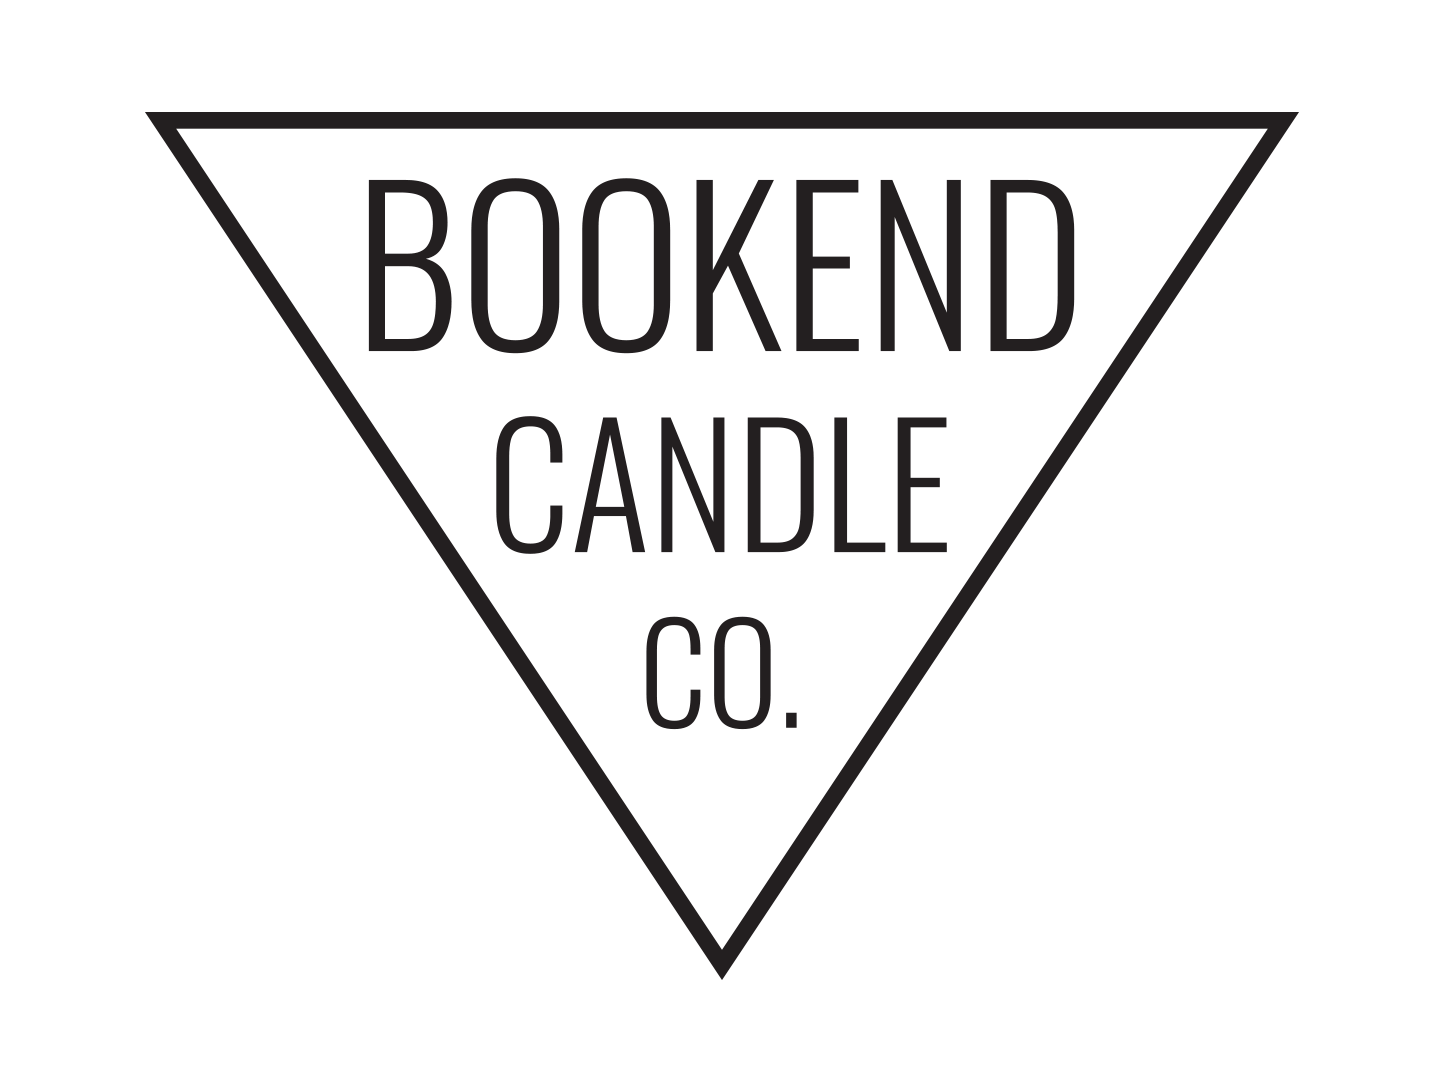 Bookend Candle Co.